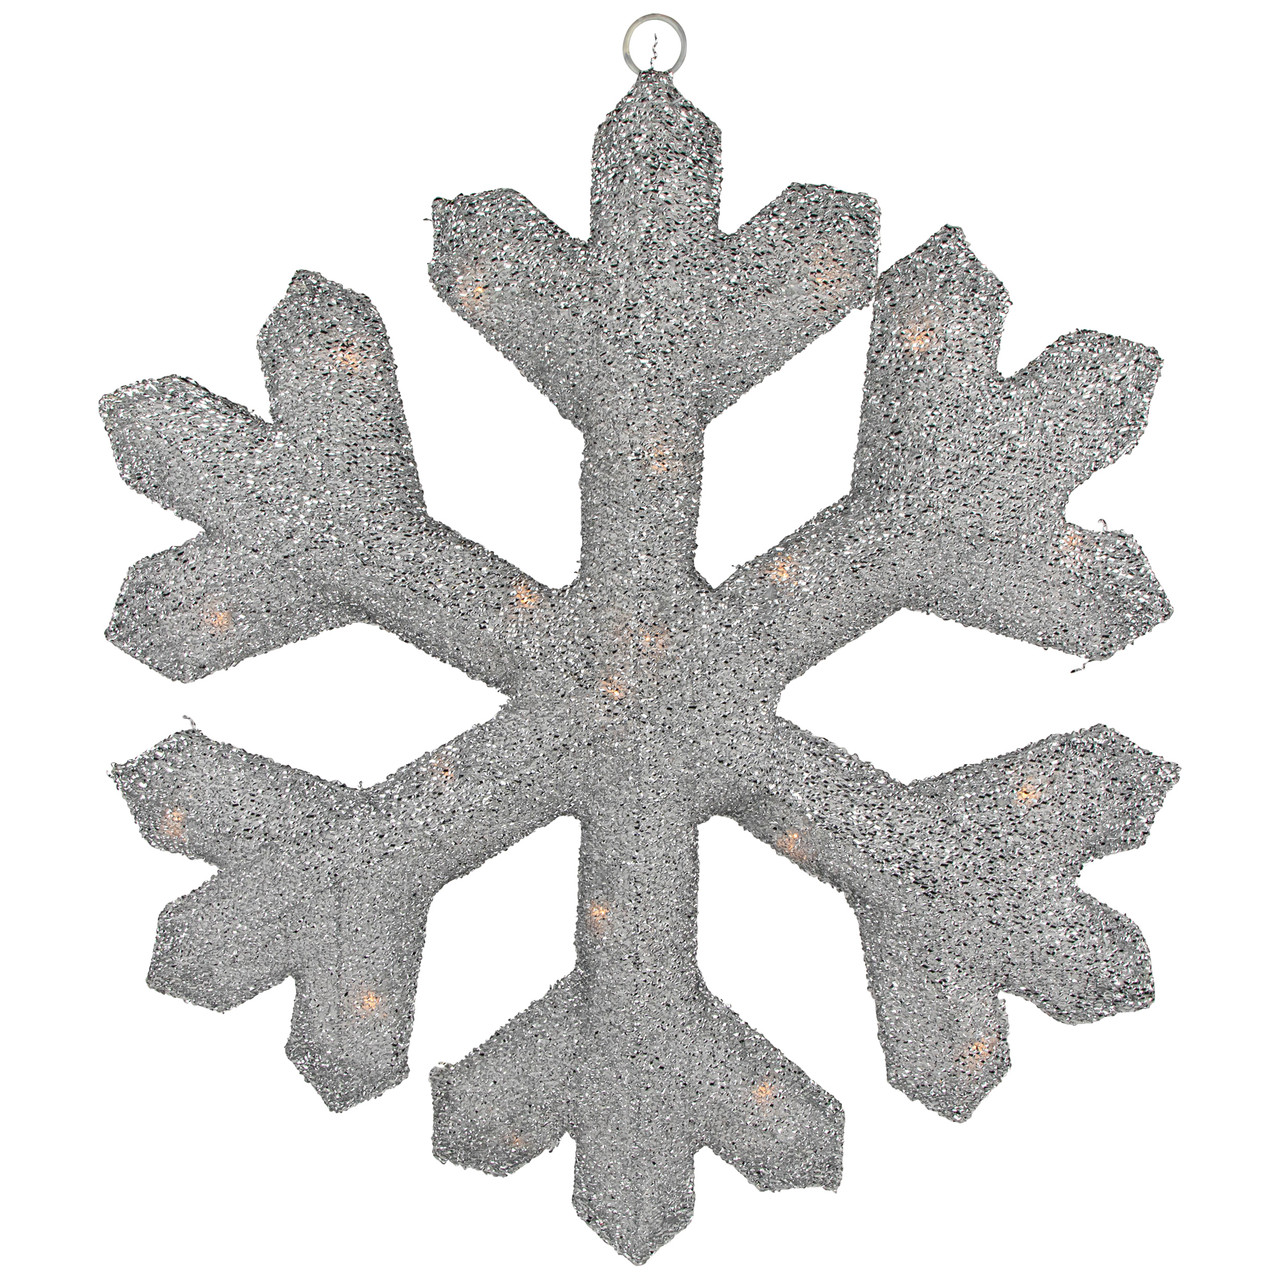  12 Inch Christmas Snowflakes Large Christmas Snowflake  Ornaments Glitter Christmas Hanging Ornaments Big Christmas Snowflake  Decorations for Window Decor Winter Decorations (White,24 Pcs) : Home &  Kitchen